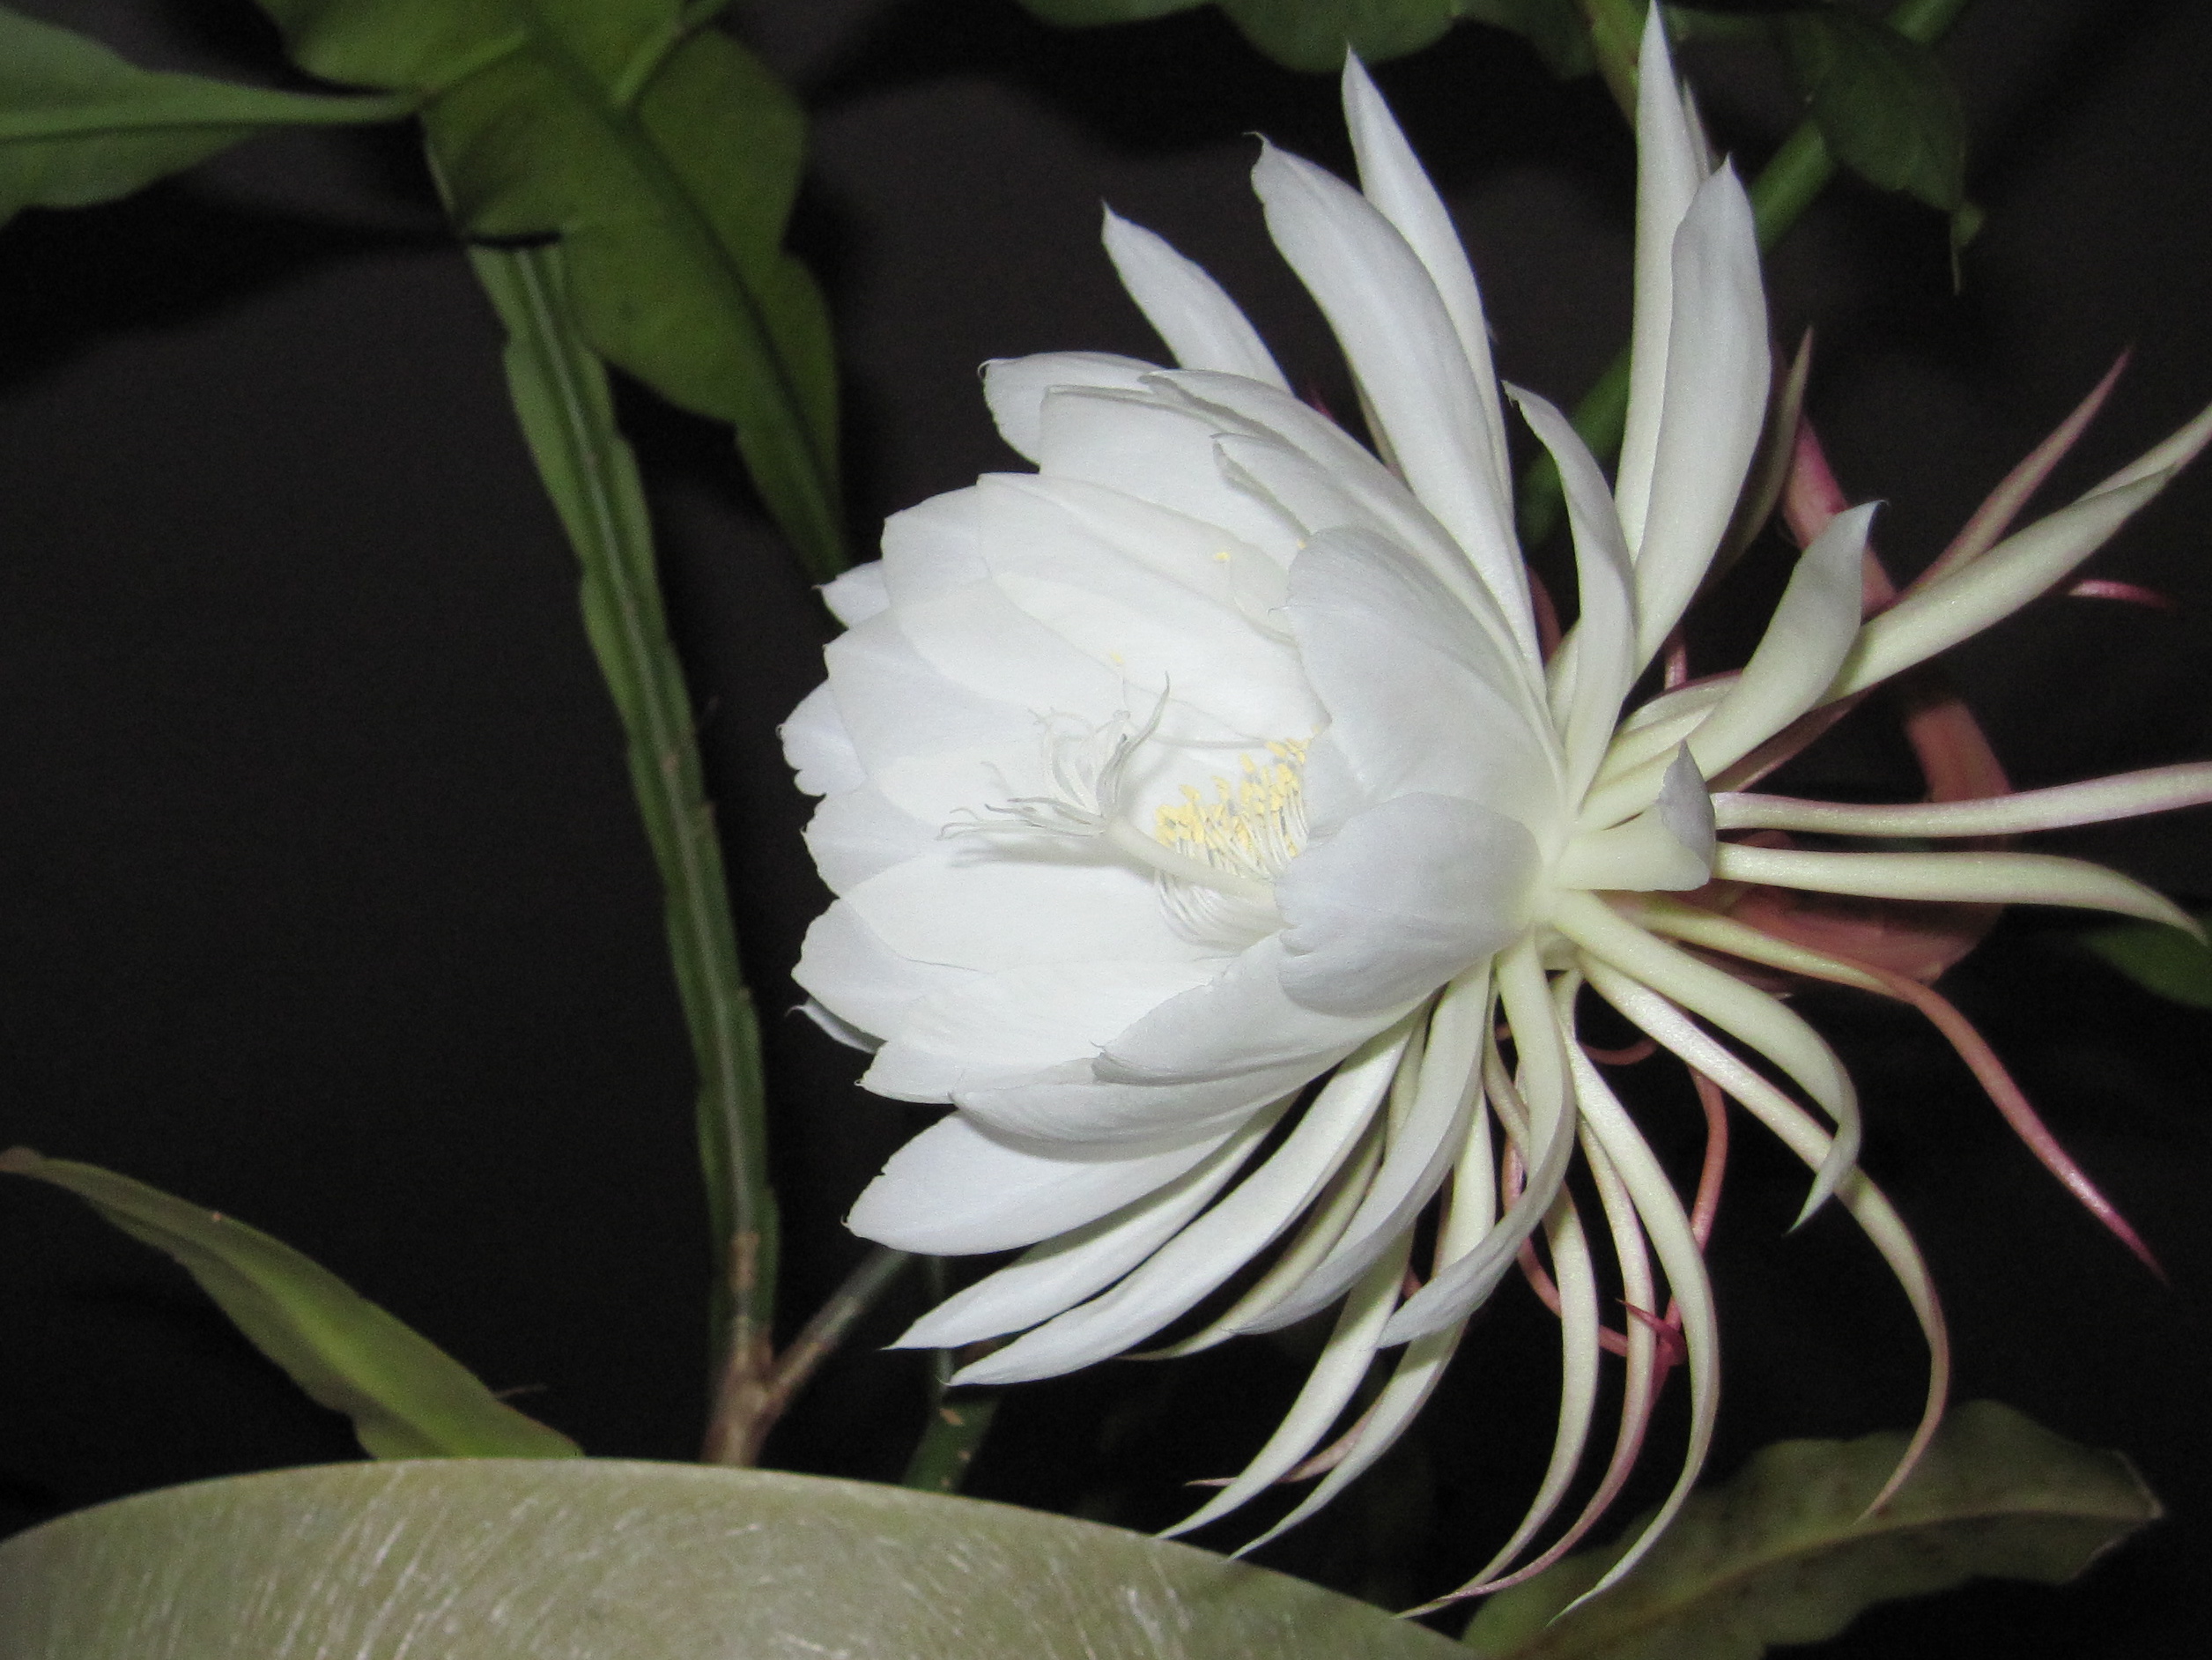 Photographing a night blooming cereus: What it took to get this shot